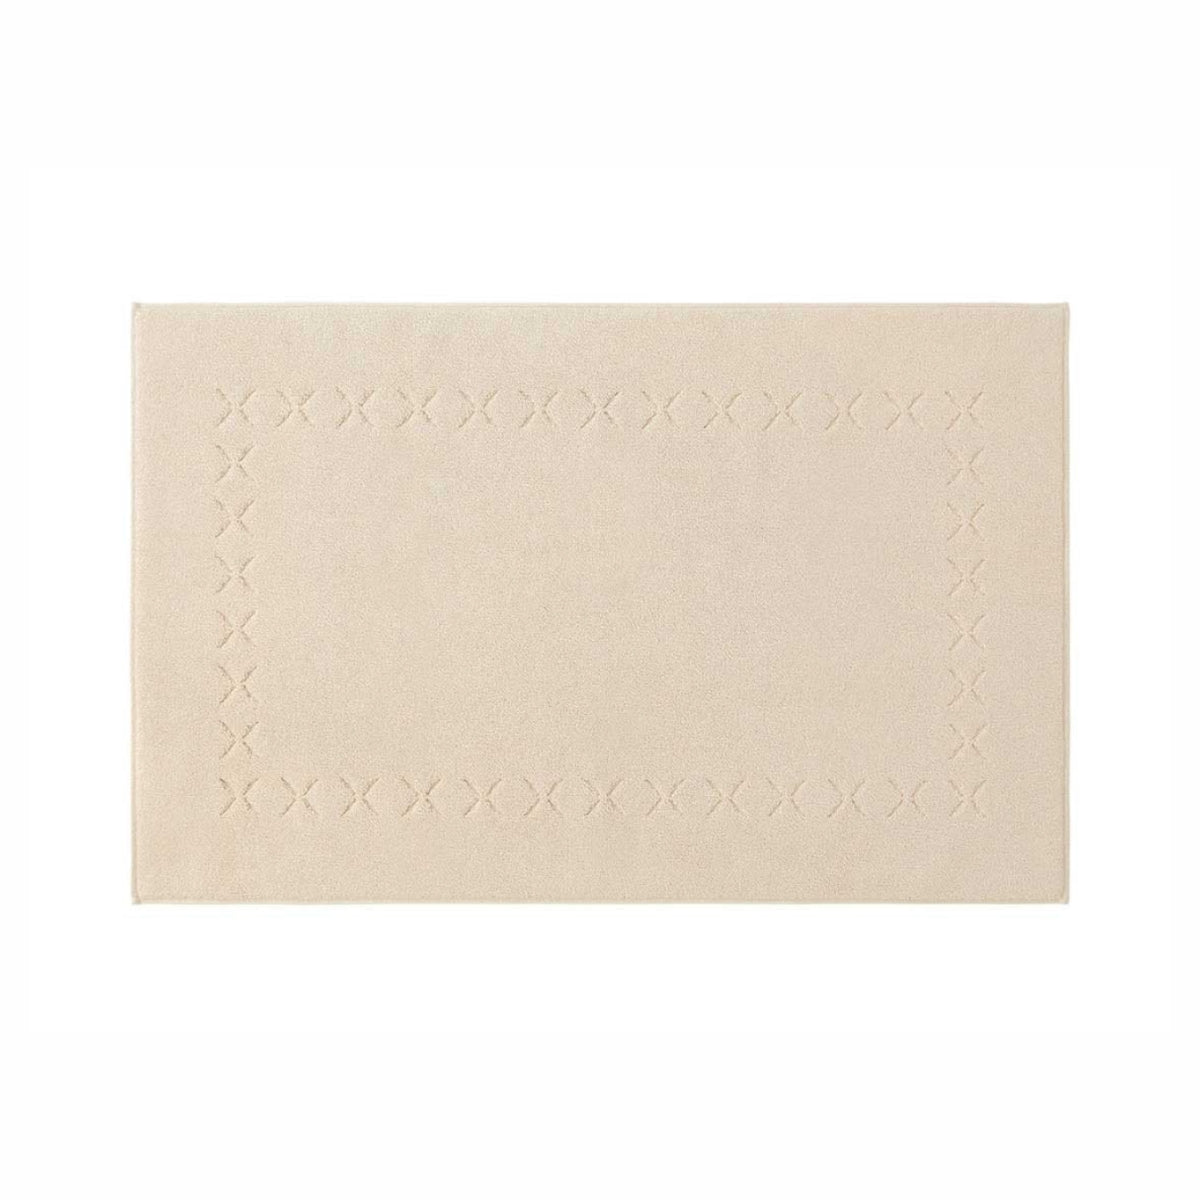 Yves Delorme Nature Bath Towels and Mats - Galet